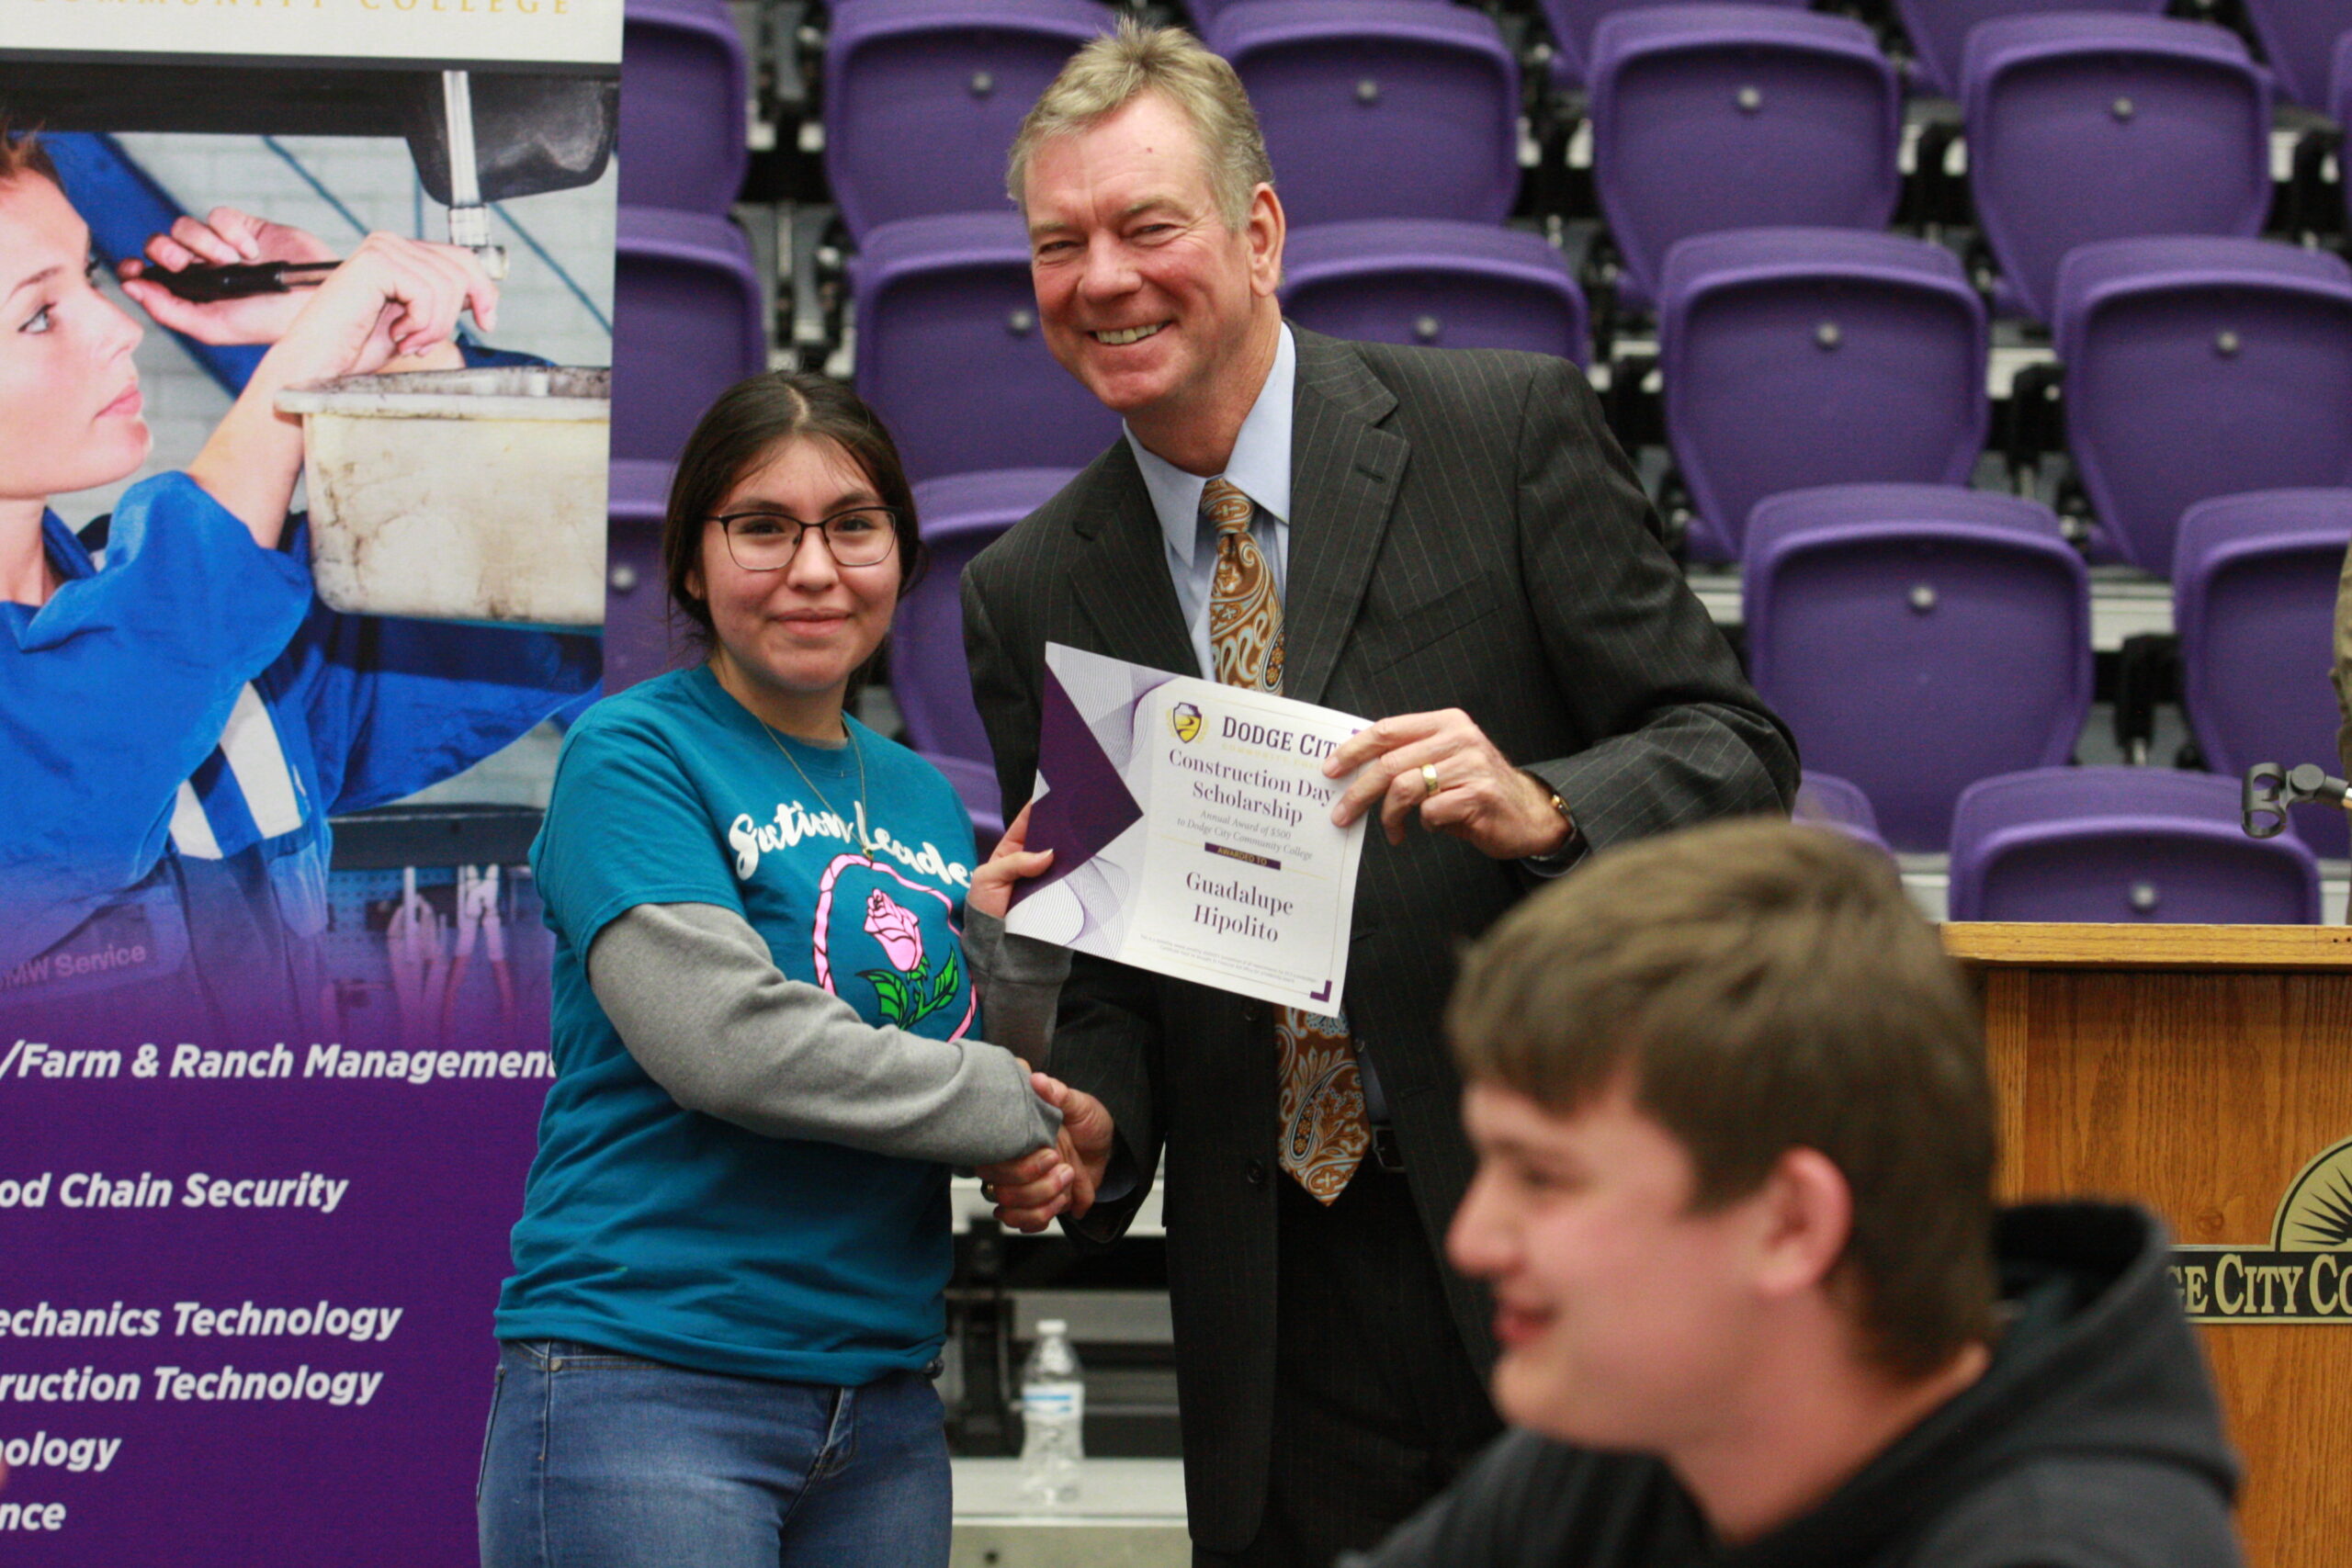 Dr. Harold Nolte, president presenting scholarship to a high school student Guadalupe Hipolito during construction day